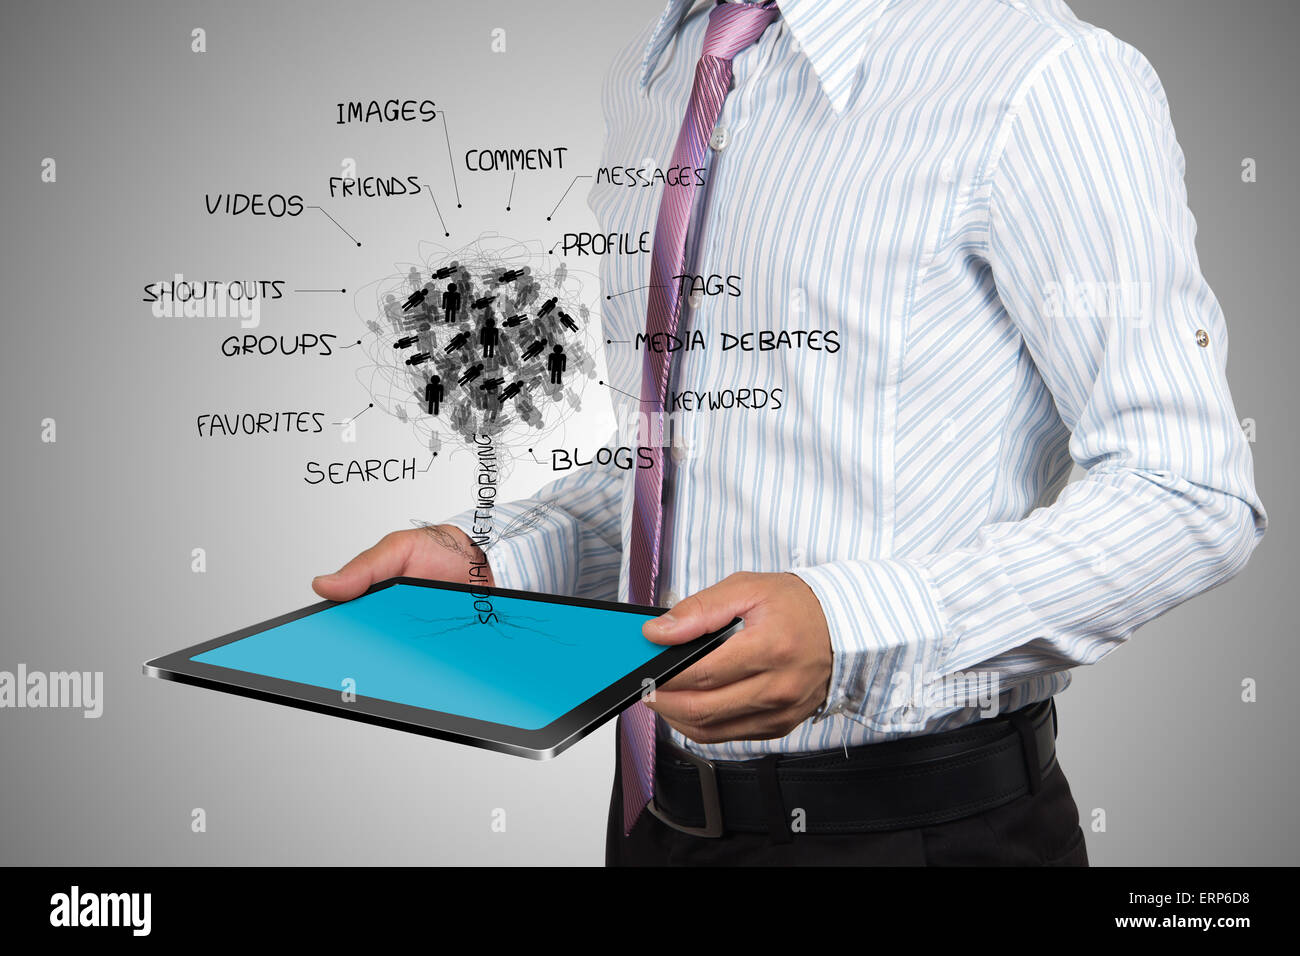 The social networks of business people on tablet. Stock Photo